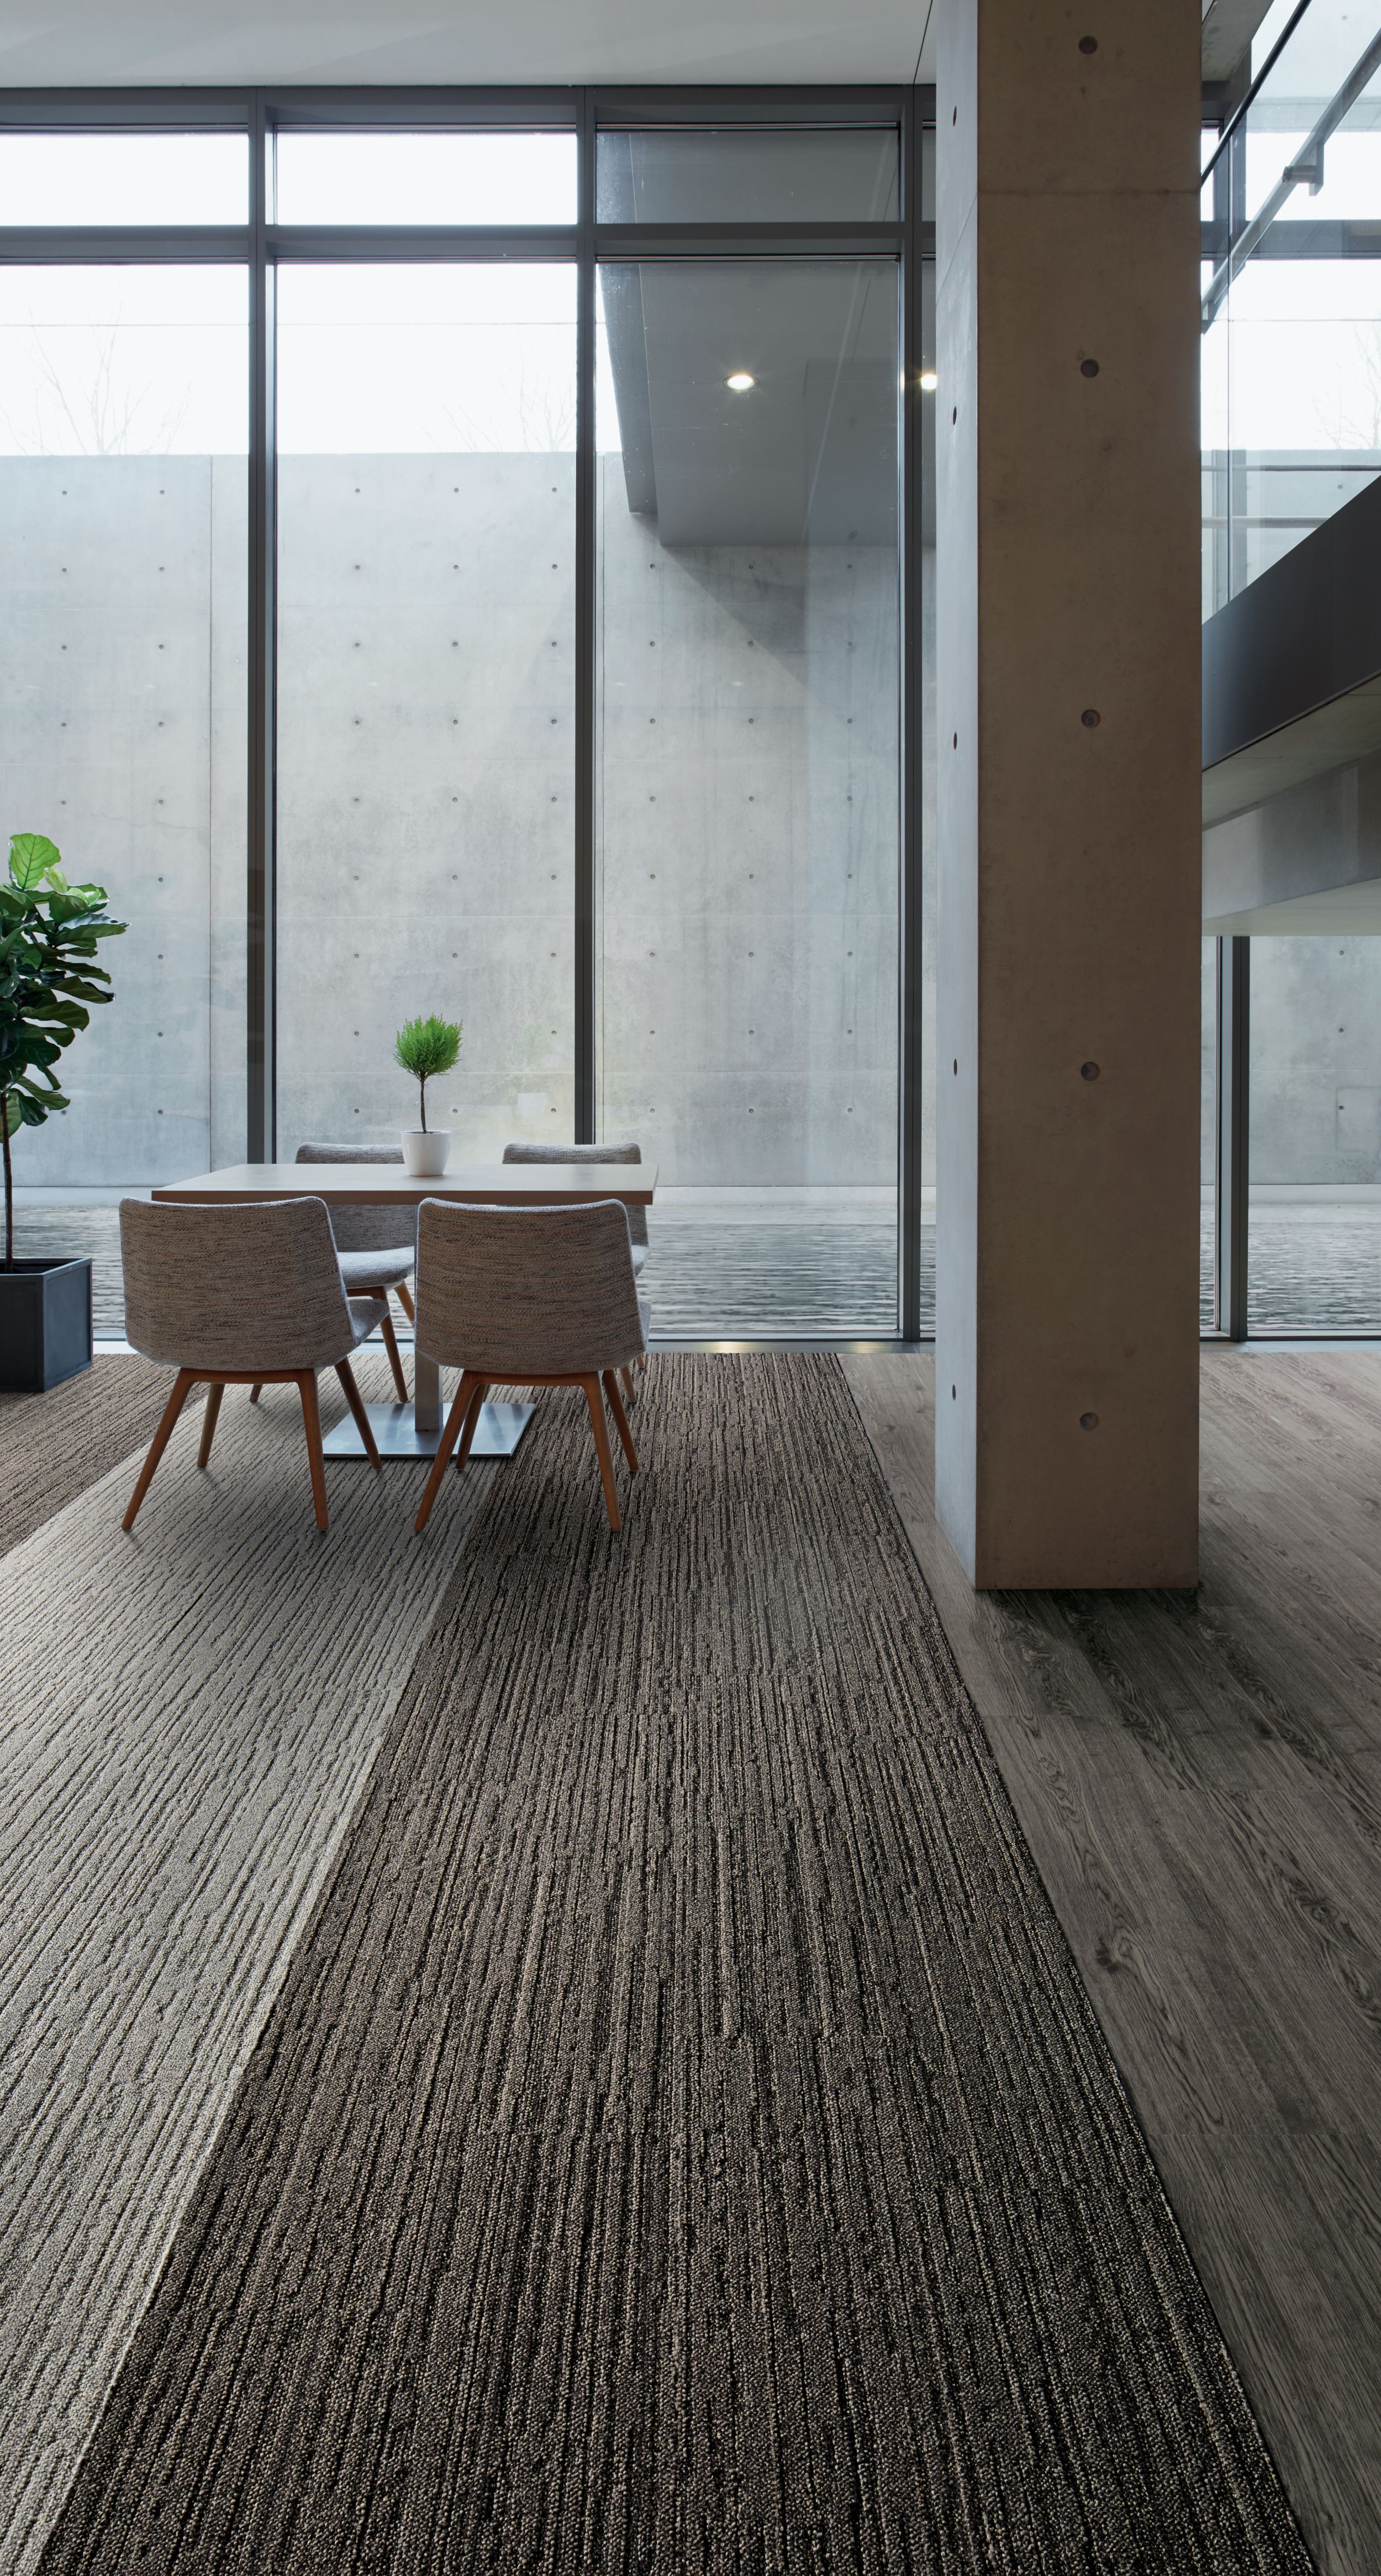 Interface WW880 plank carpet tile and Natural Woodgrains LVT in office common area afbeeldingnummer 6